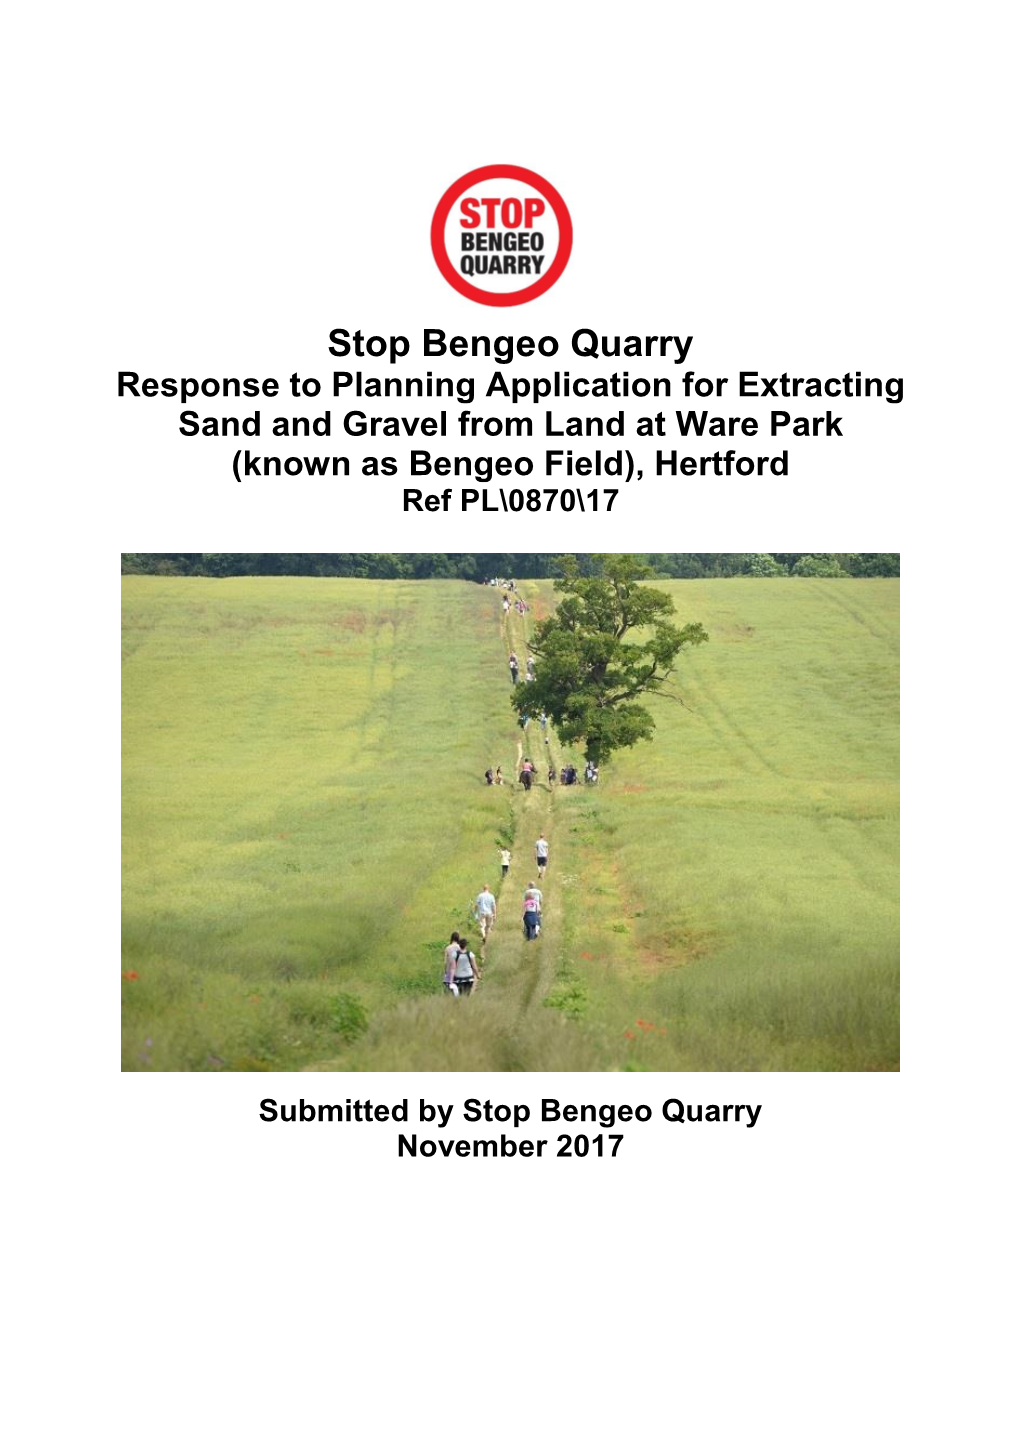 Stop Bengeo Quarry Response to Planning Application for Extracting Sand and Gravel from Land at Ware Park (Known As Bengeo Field), Hertford Ref PL\0870\17